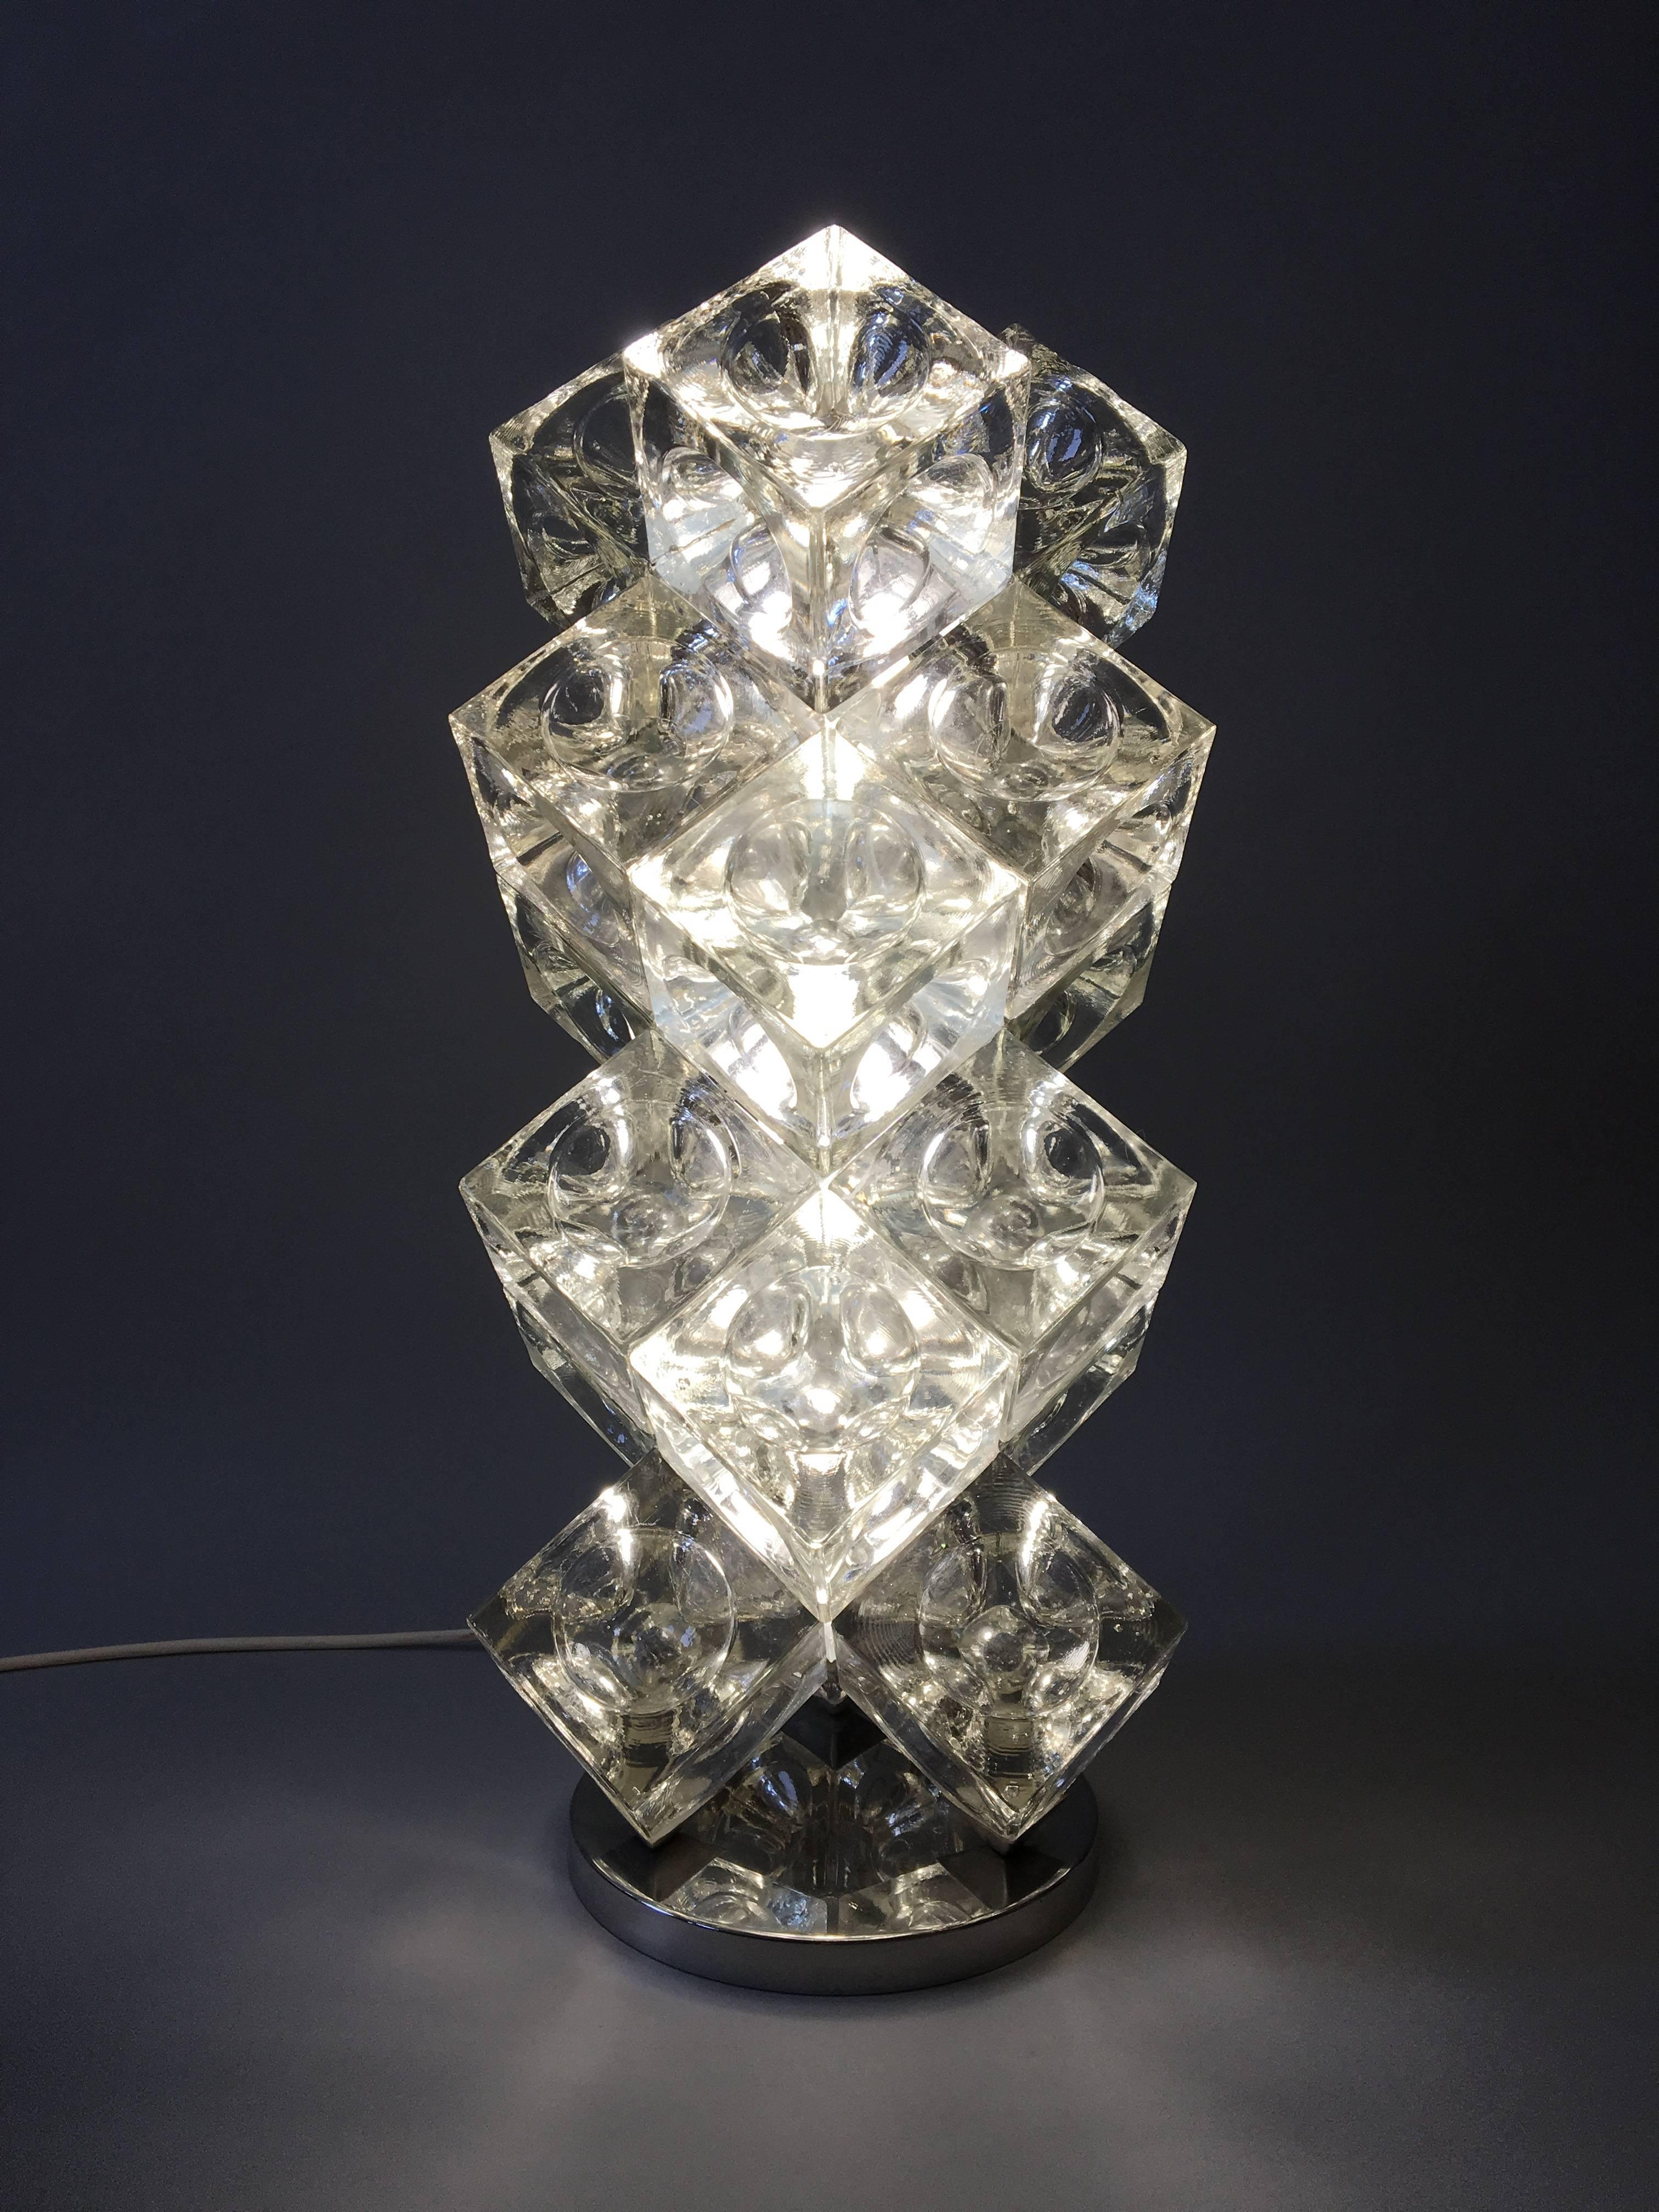 Lamp is made of 18 clear glass cubes with an internal hemispheric groove on a chrome base. There are three internal light bulbs. All original parts.
Follow Frank on Instagram.  Frank.rogin  photos dedicated to Poliarte.